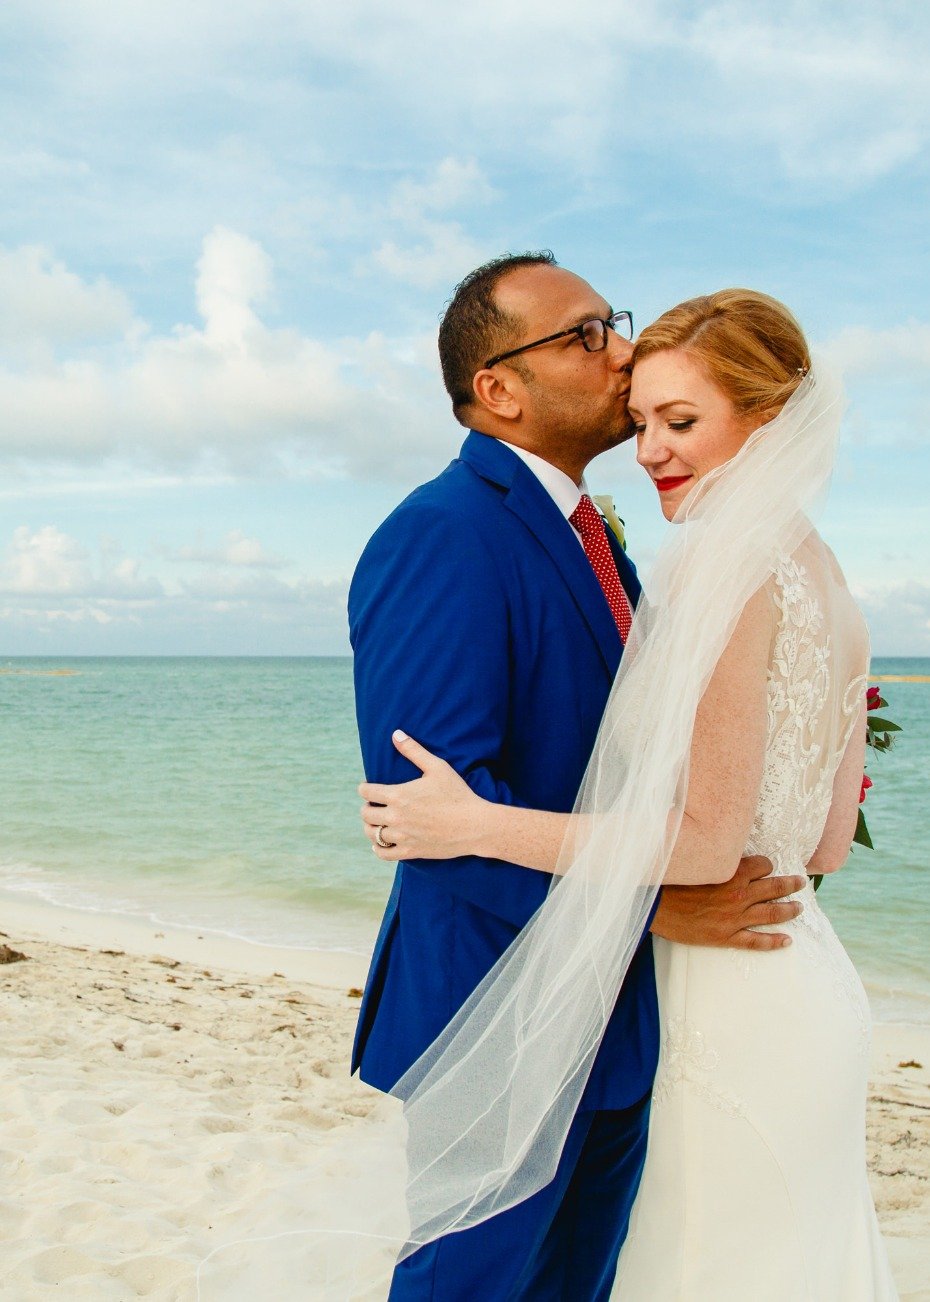 Romantic and colorful beach wedding in Mexico